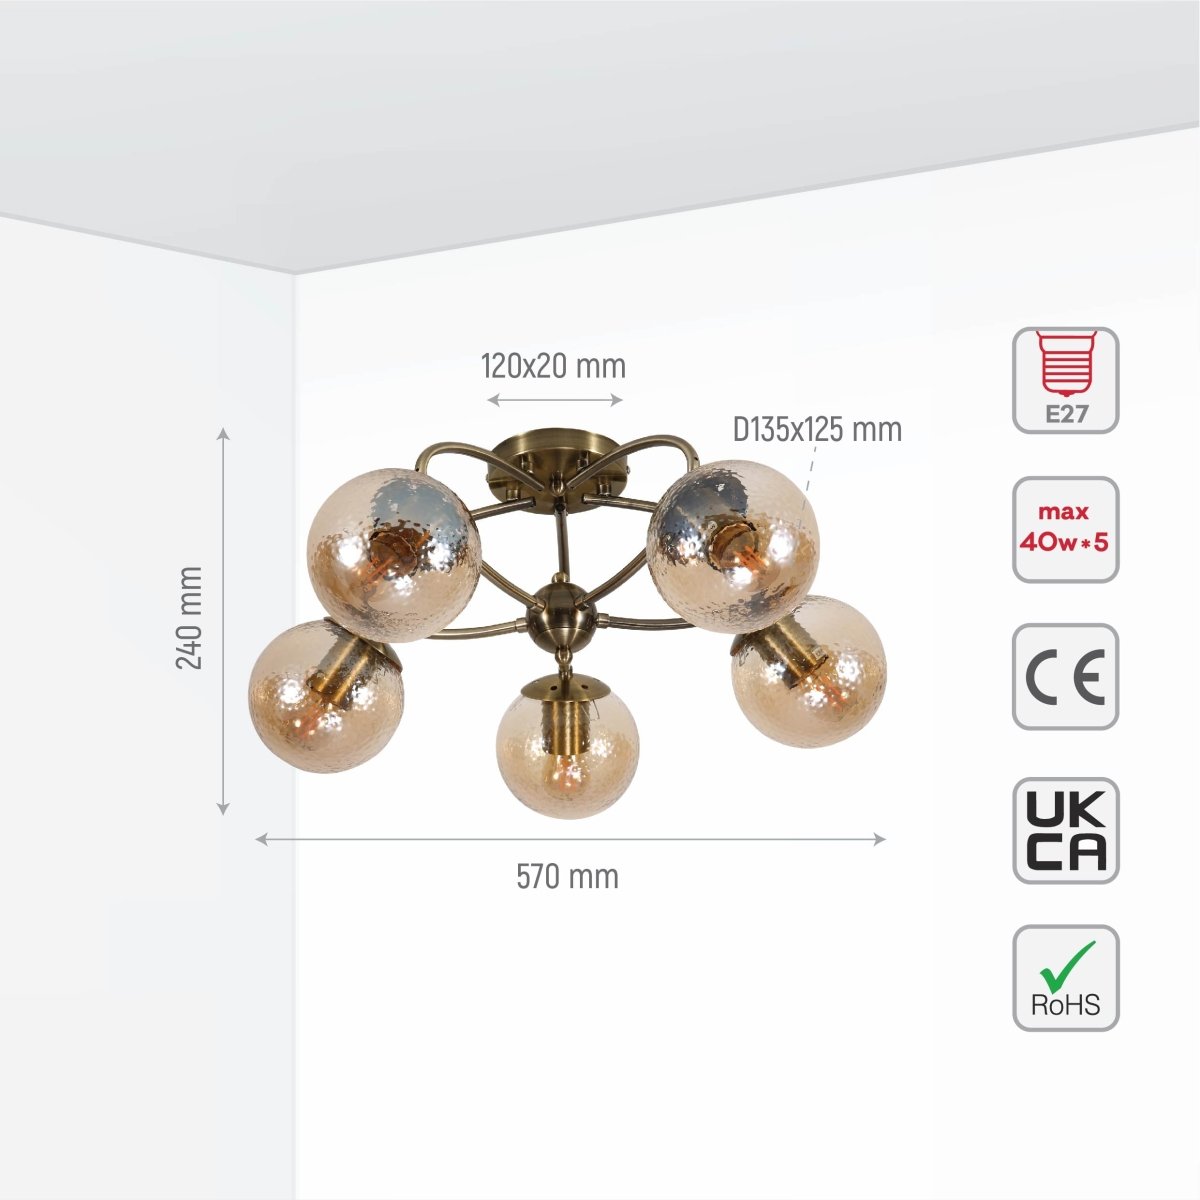 Size and specs of Textured Amber Globe Antique Brass Semi Circle Arm Semi Flush Ceiling Light | TEKLED 159-17758